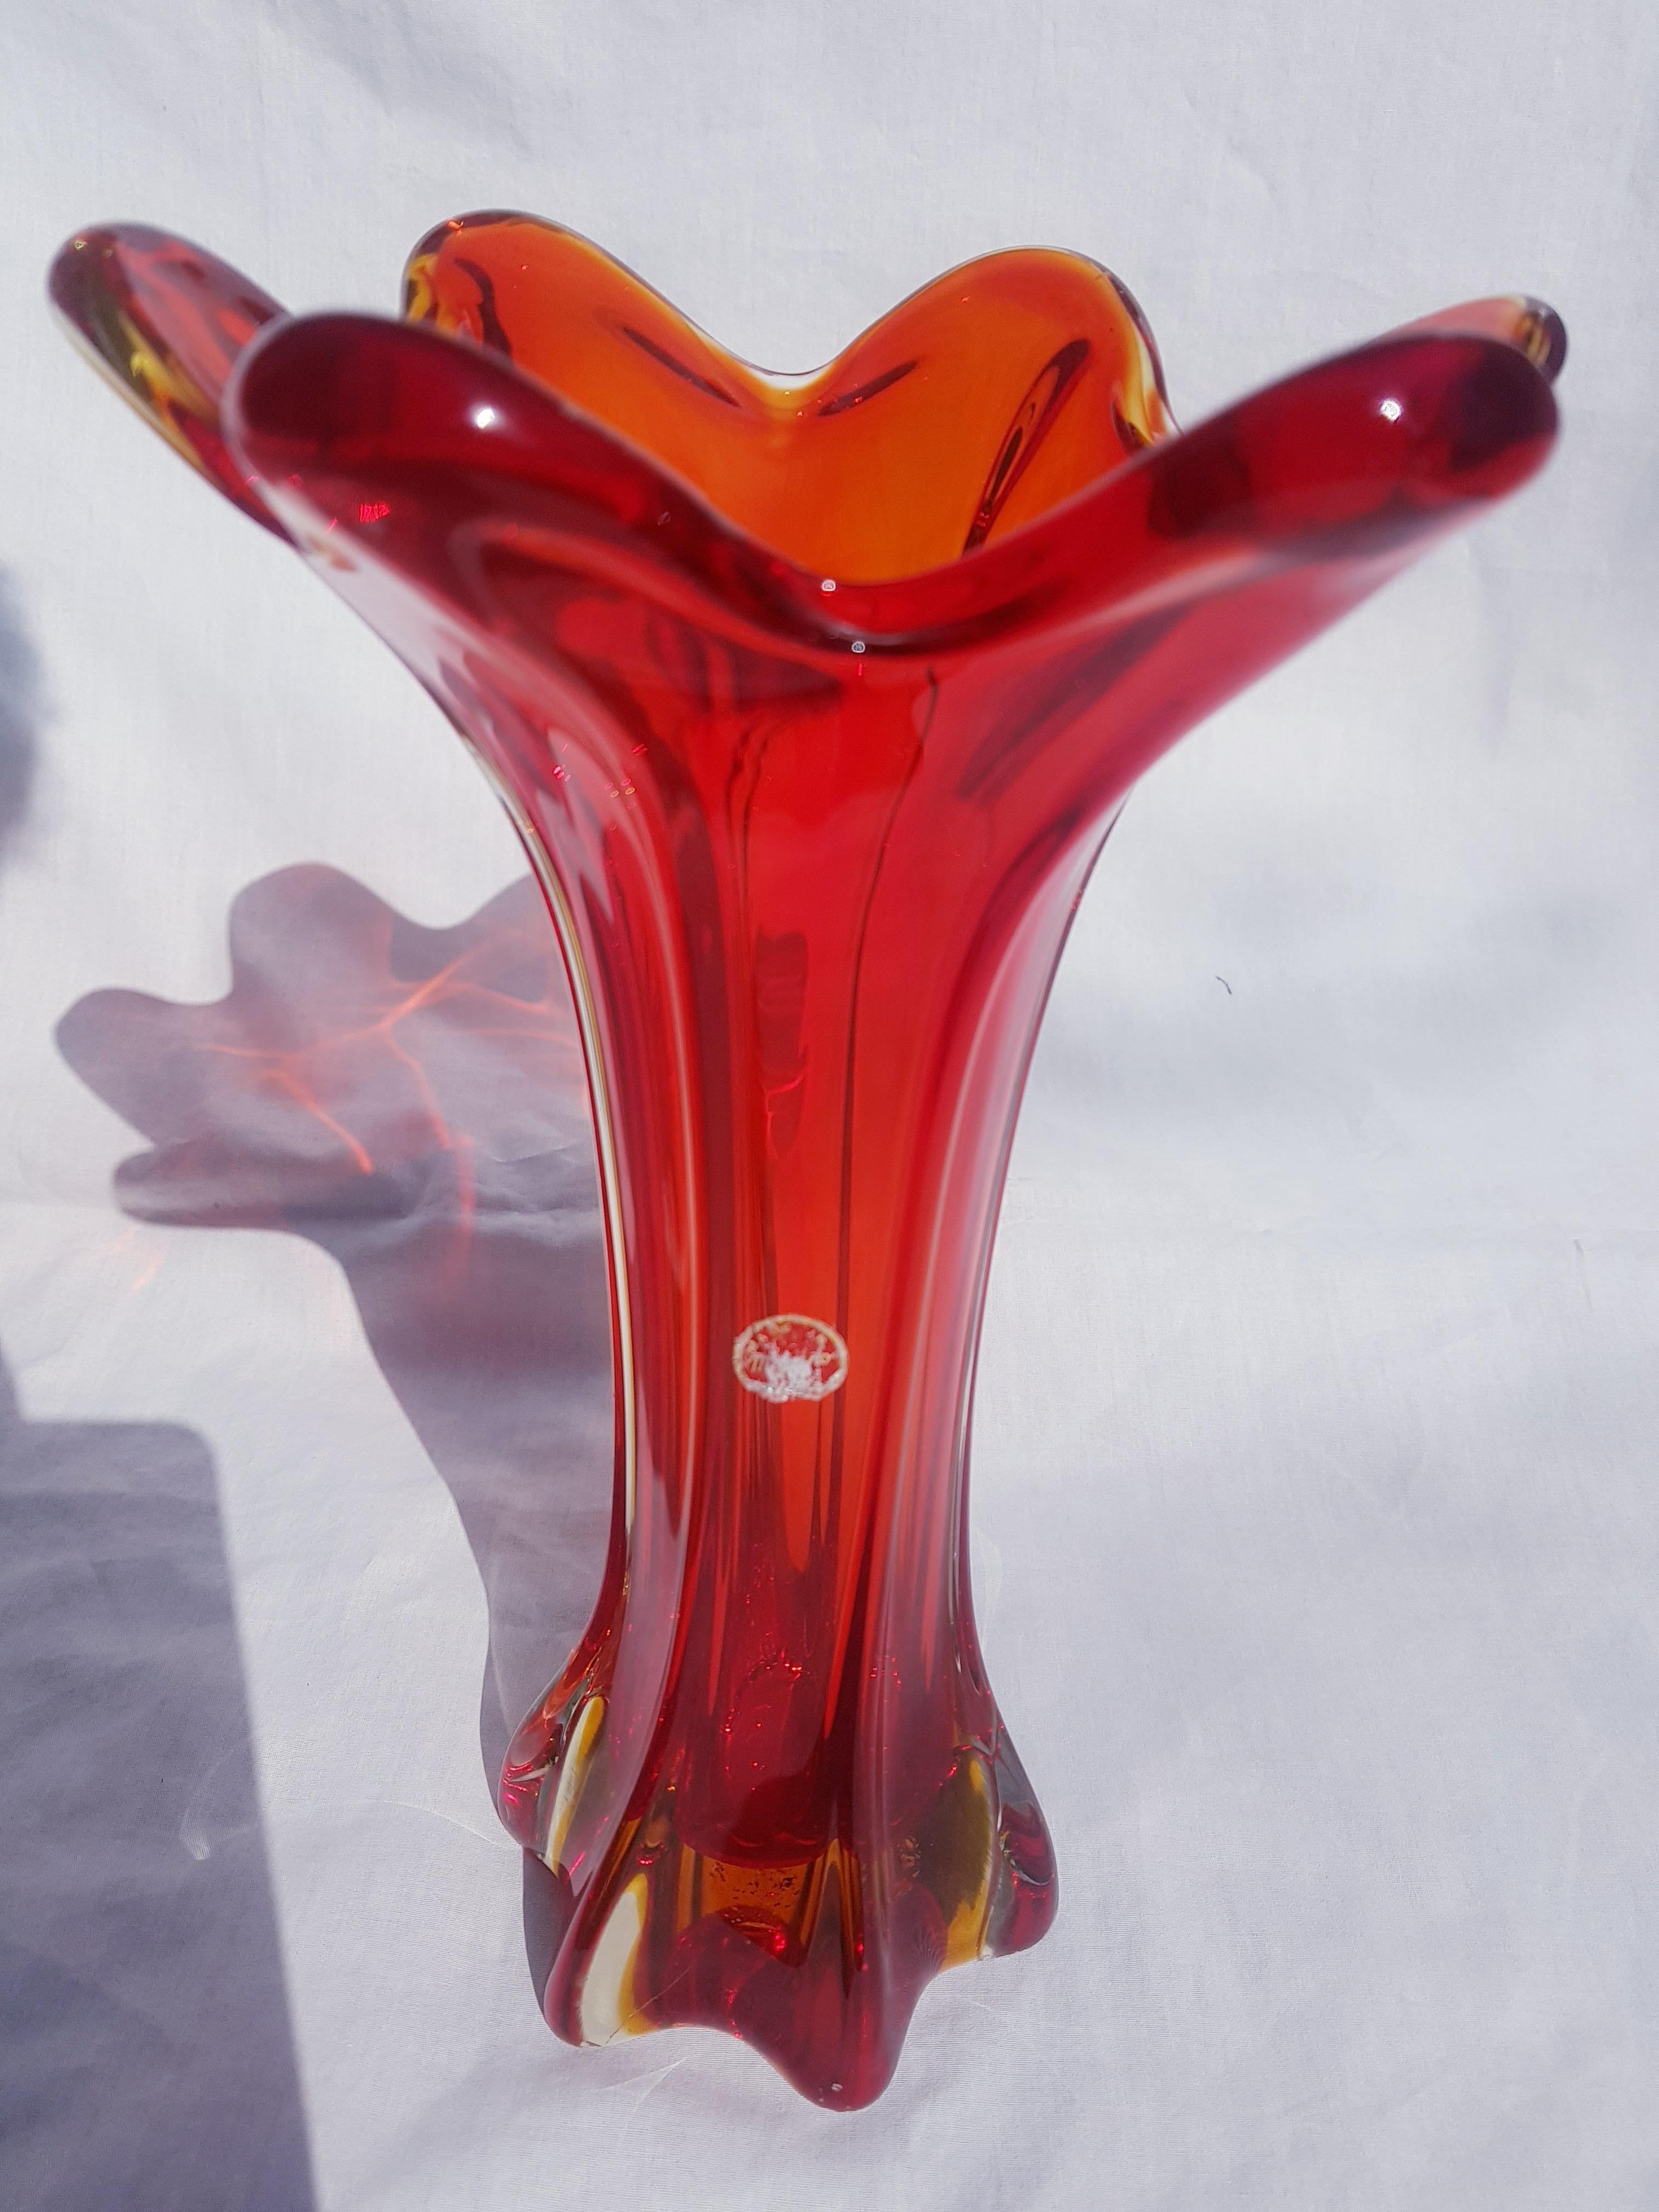 Beautiful middle of century murano glass somerso vase, red, amber and clear by Antonio da Ros for Cenedese with original sticker brilliant condition.